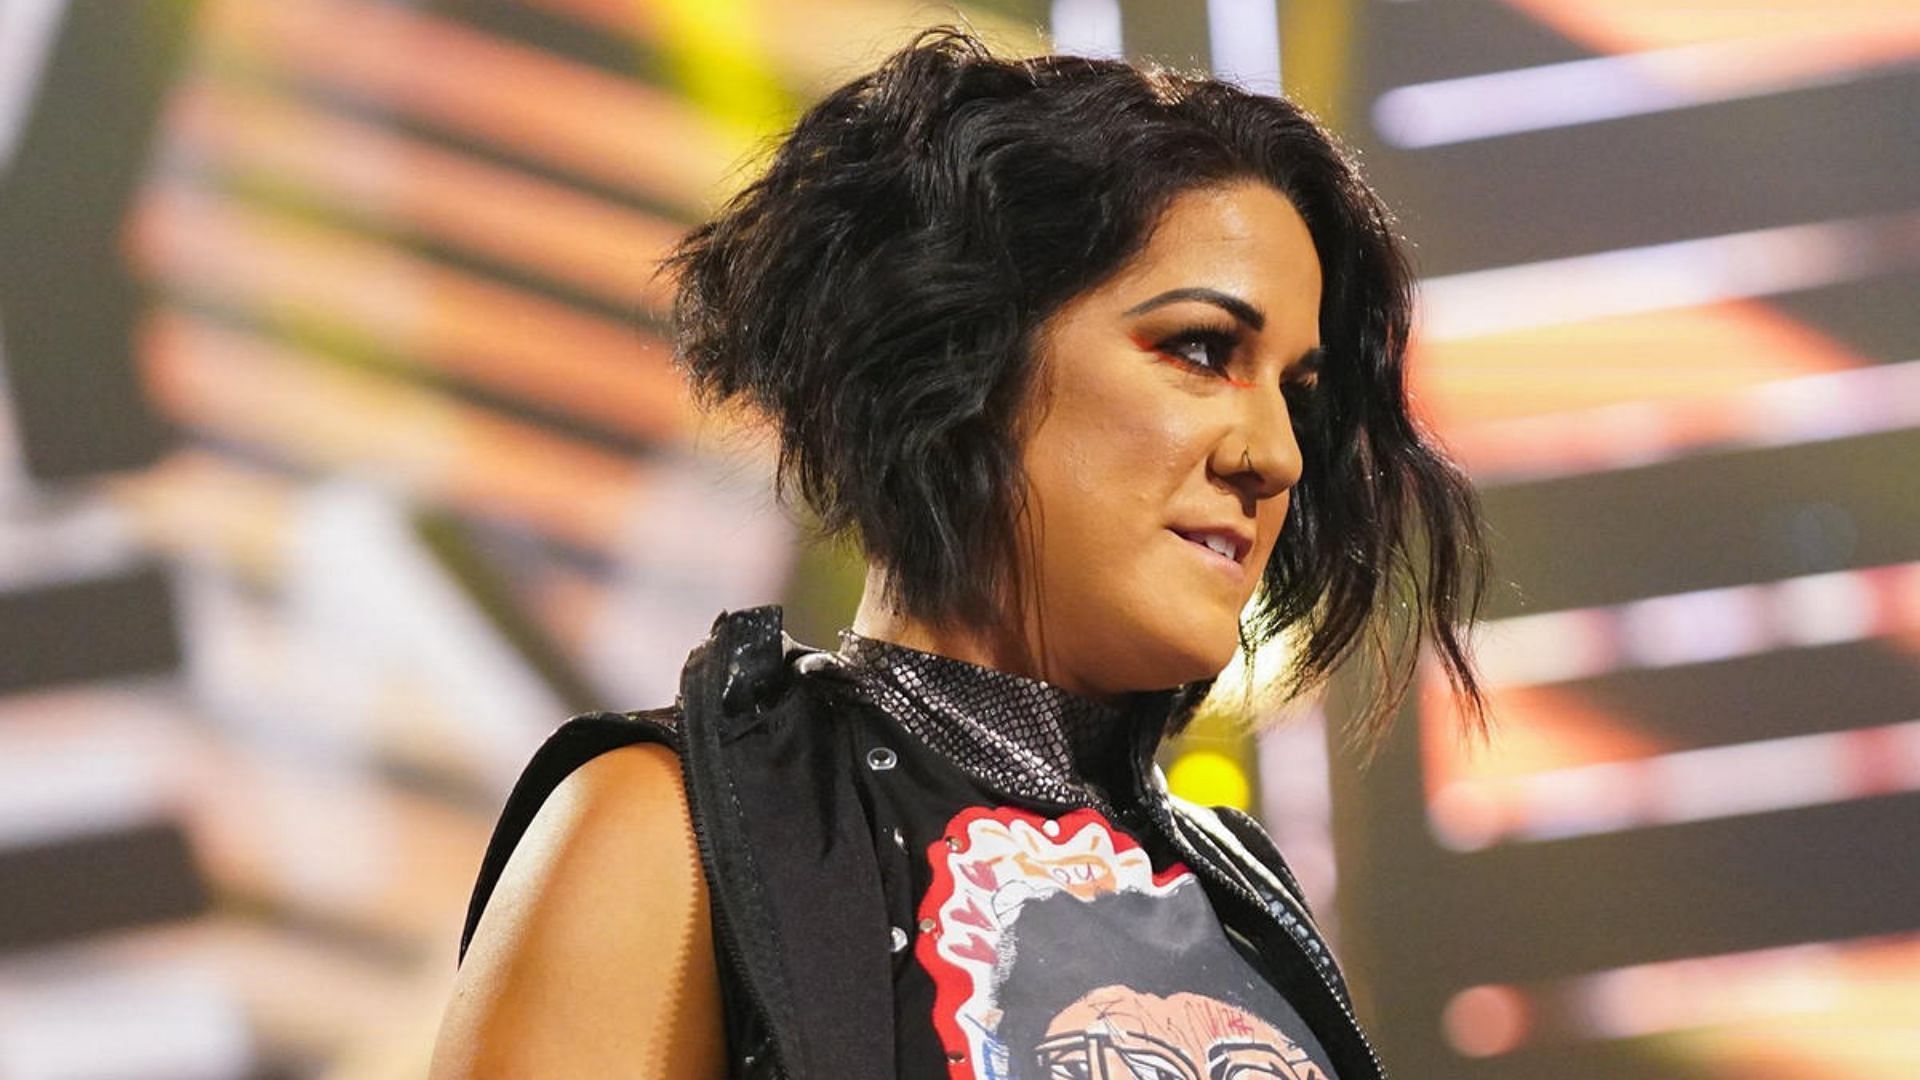 Bayley is one of the favorites to win the Royal Rumble